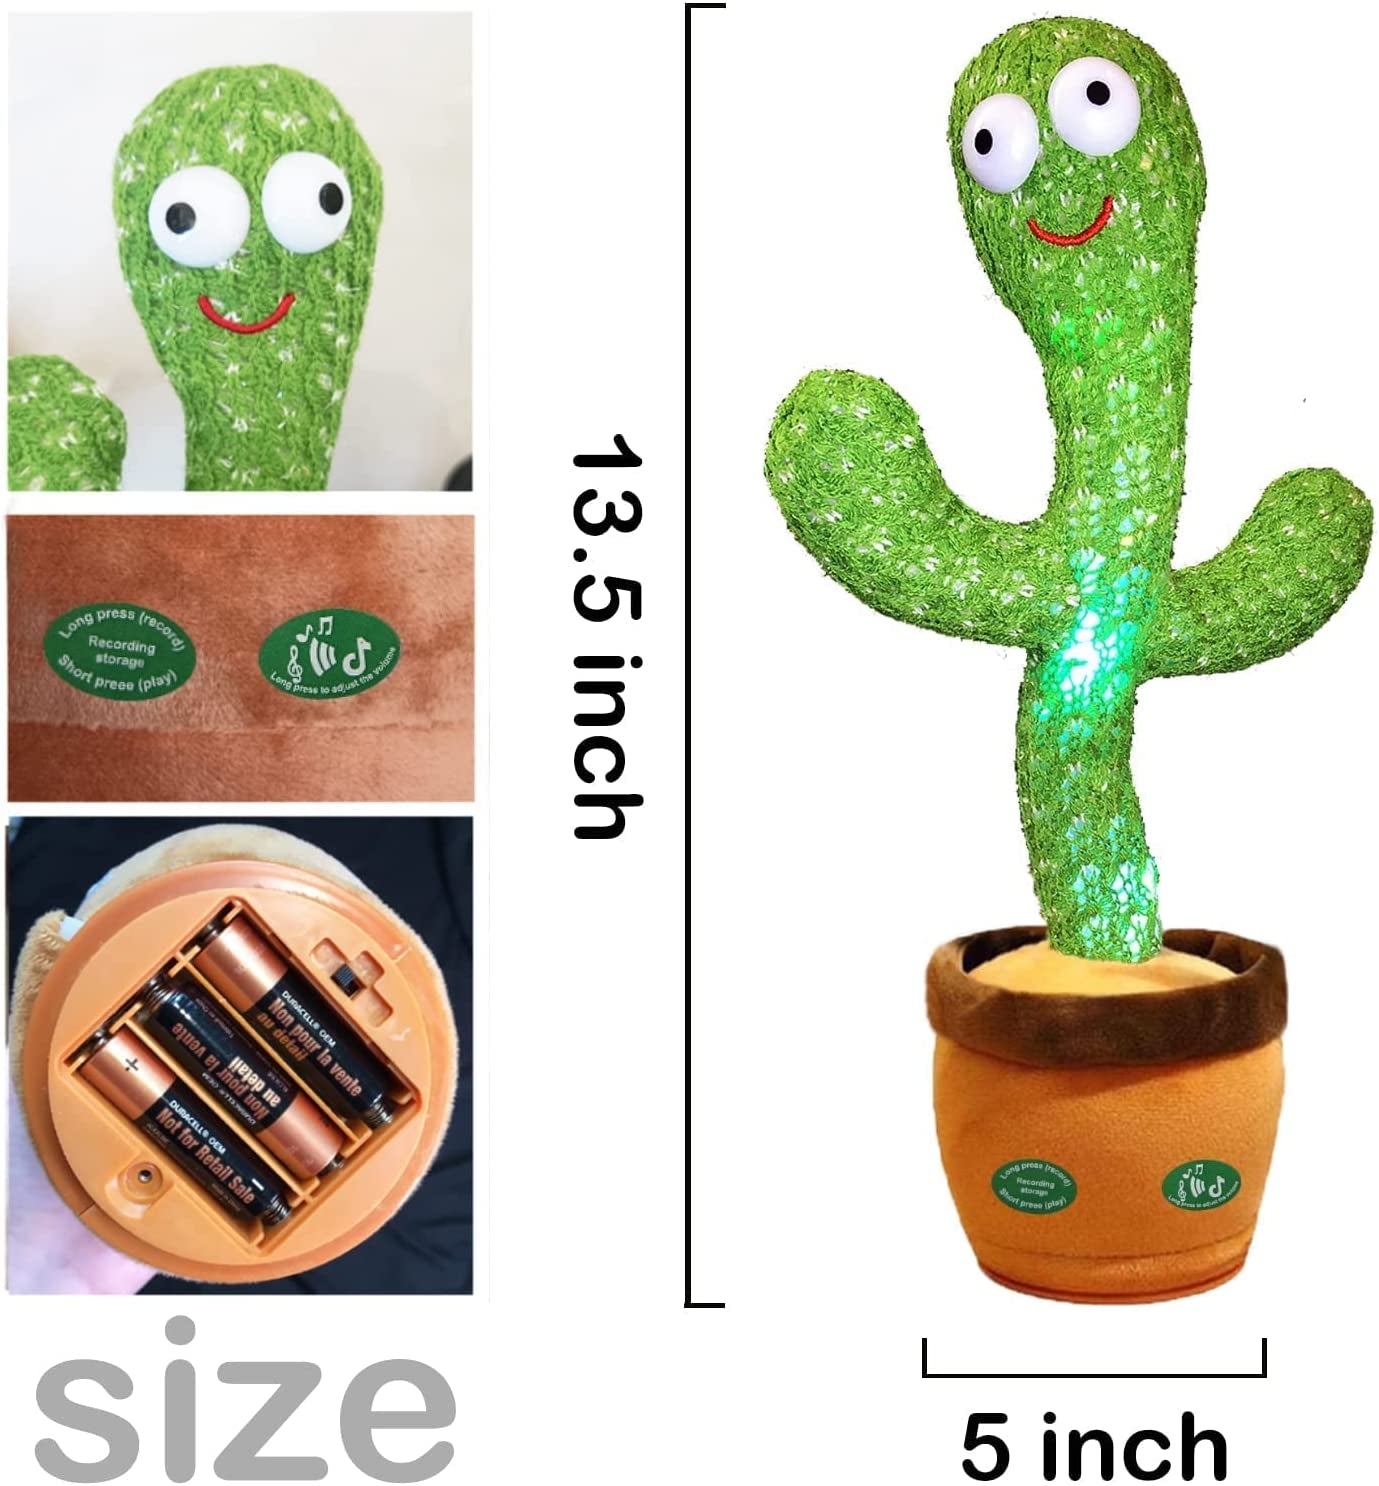 Interactive Singing and Dancing Cactus Toy with Voice Recording and LED, Featuring 120 Songs for Babies and Children